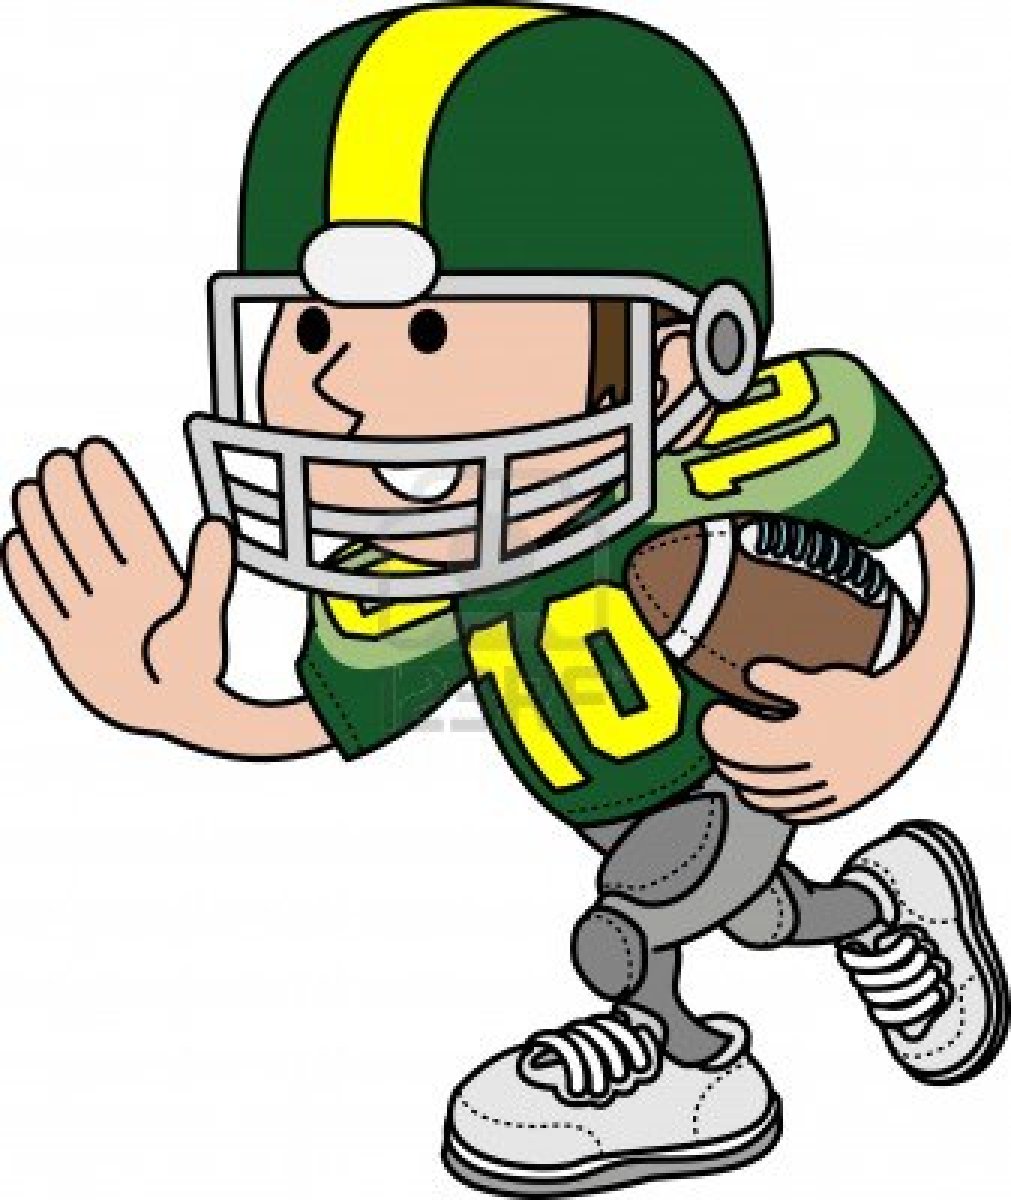 Football Player Running   Clipart Panda   Free Clipart Images